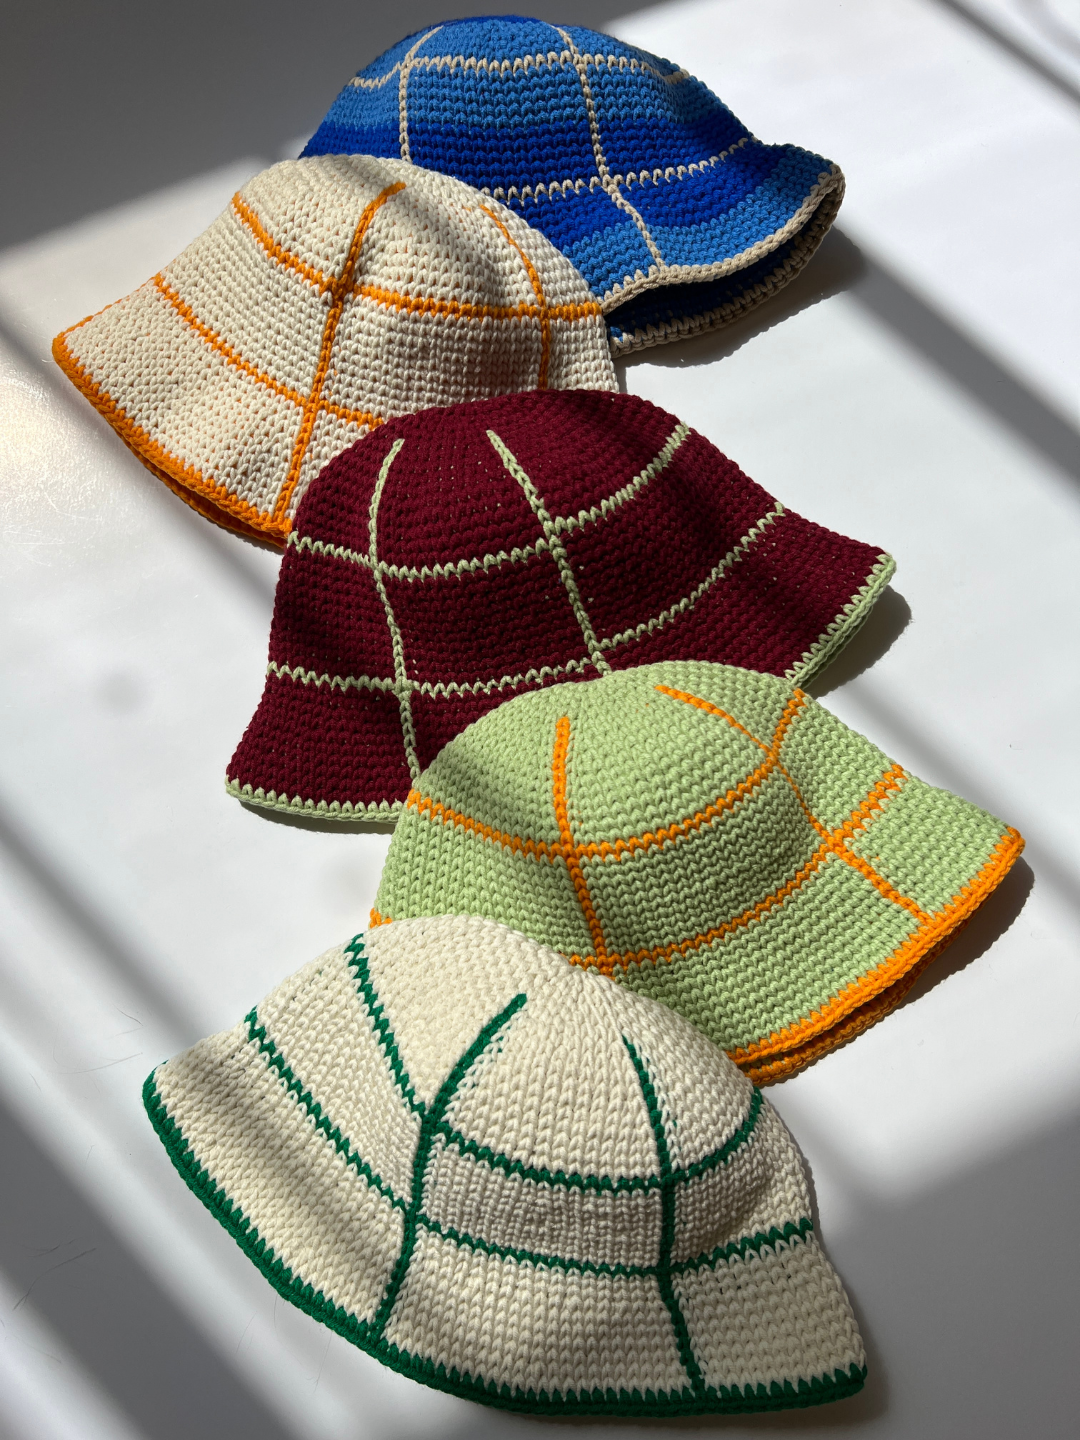 Five hand-crocheted GRID HATS - 3-6Y are displayed on a surface with sunlight casting shadows. The hats, made from cotton yarn, feature a grid design and come in different colors: blue with white and orange, white with orange and yellow, burgundy with white, green with orange, and white with green.